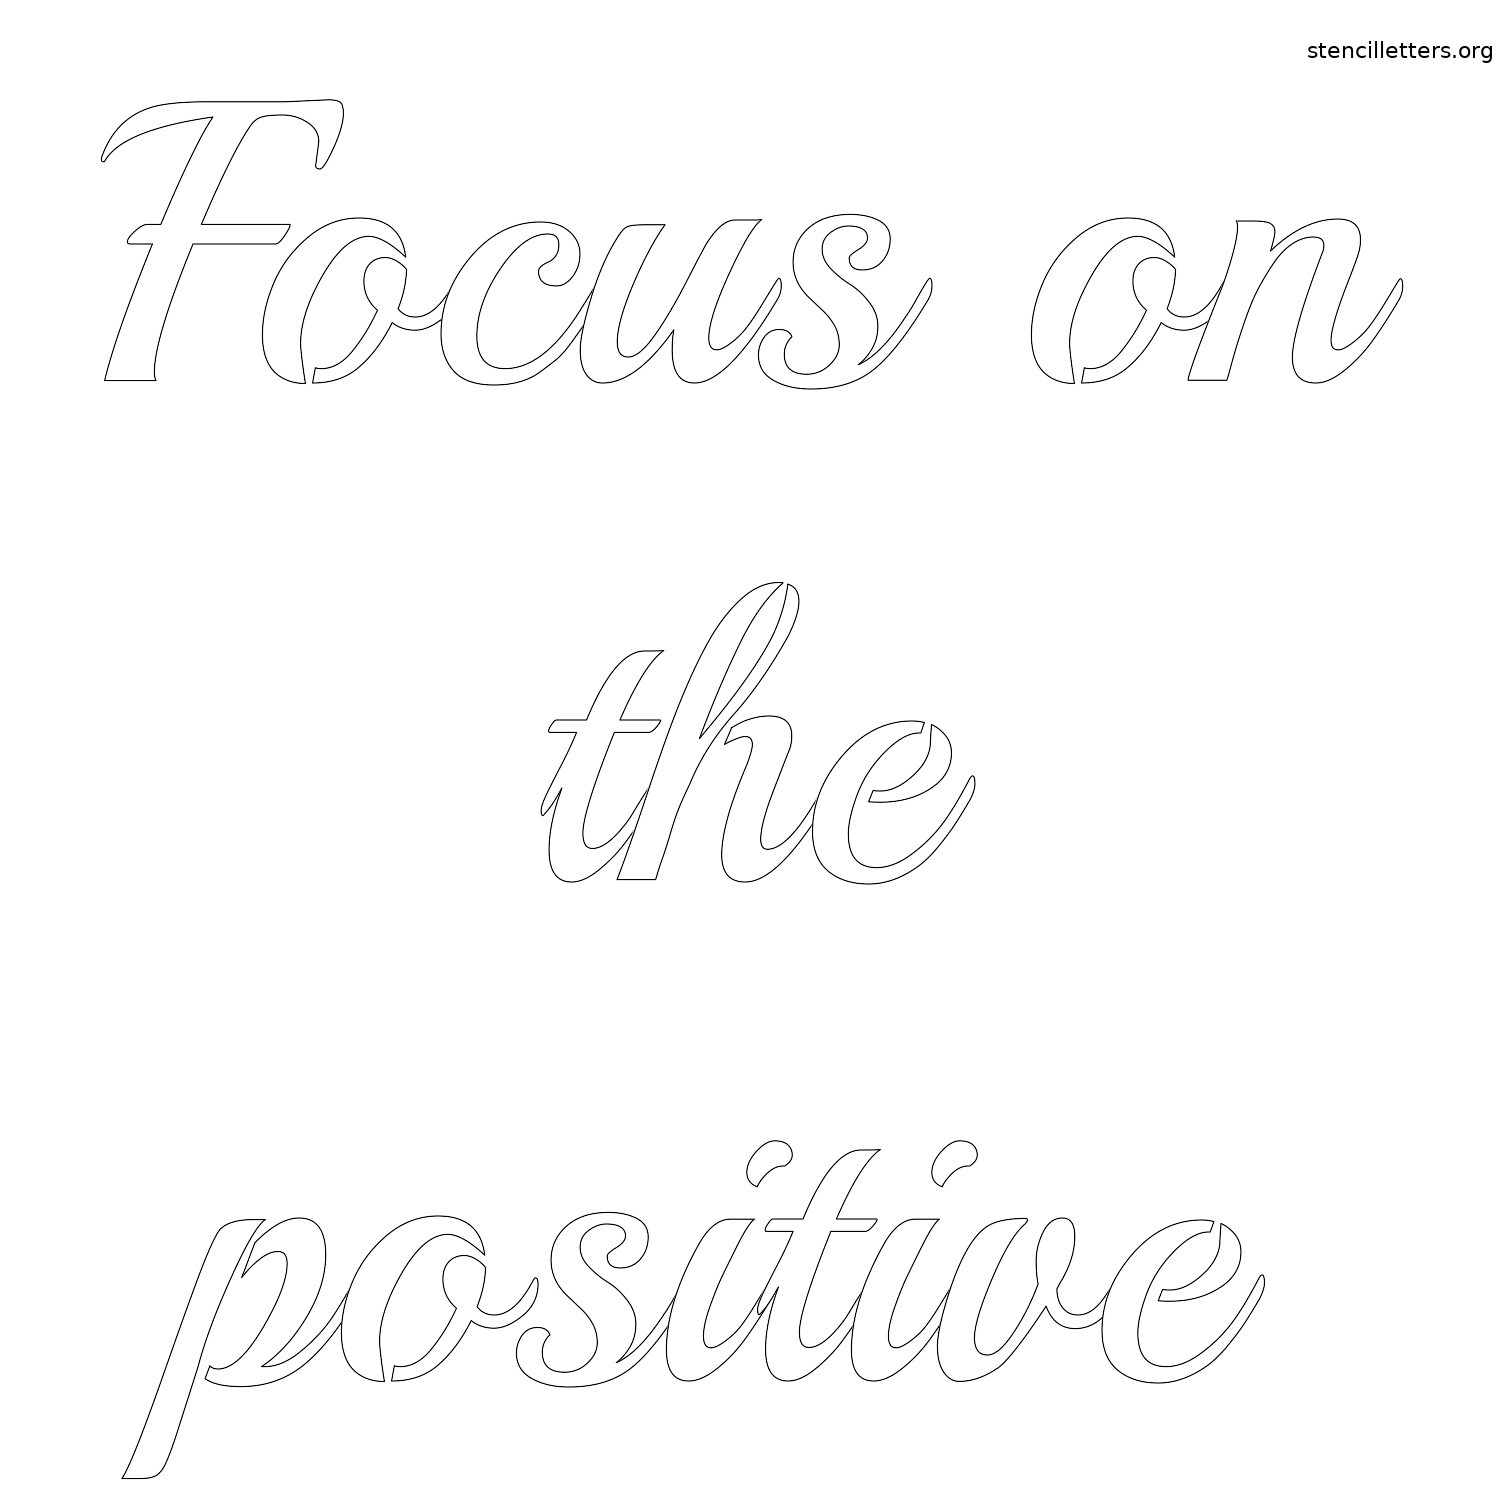 focus-on-the-positive-quote-stencil-outline.jpg